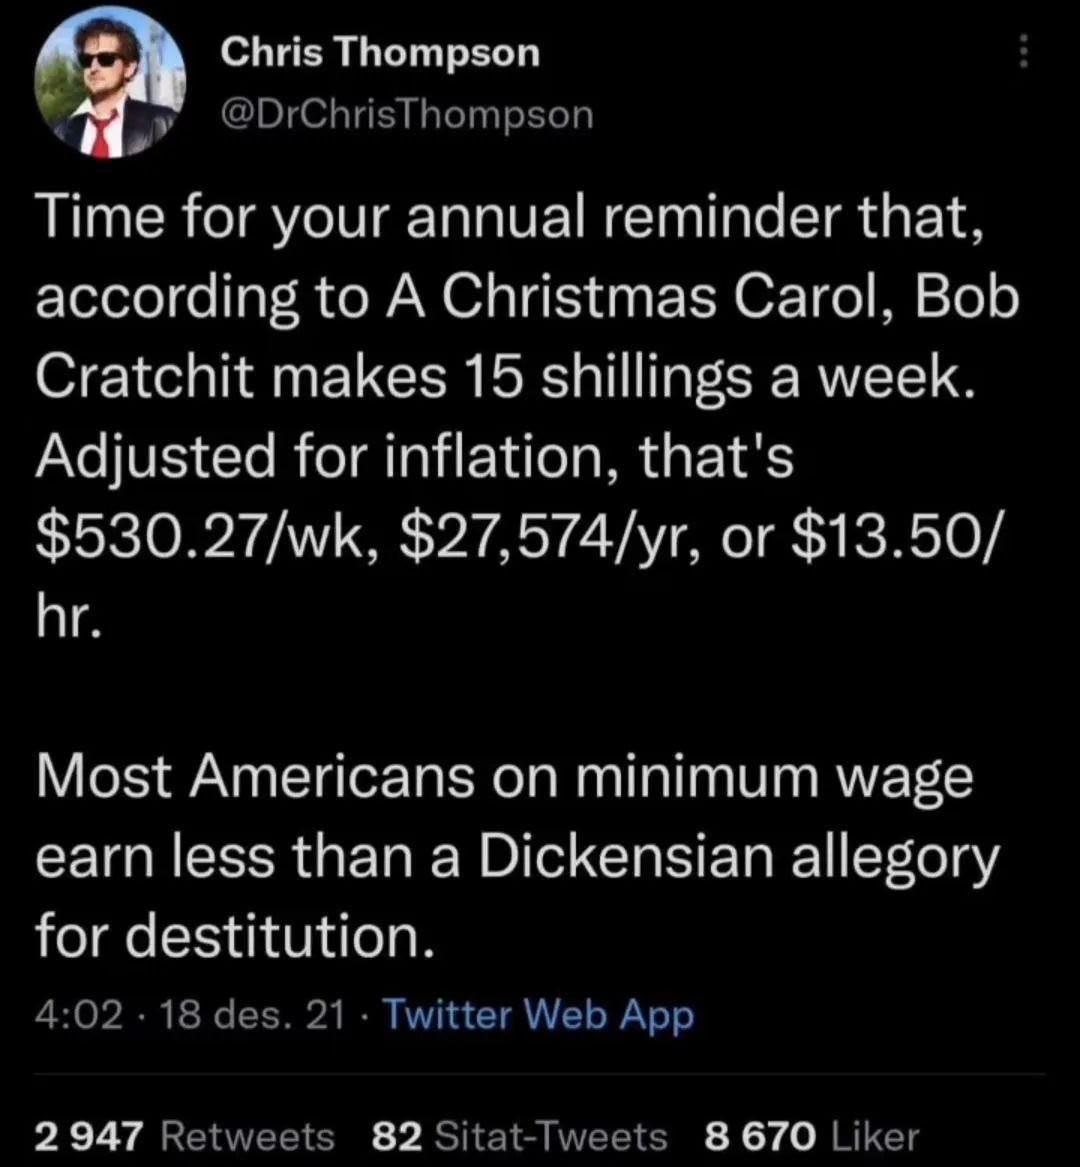 A tweet by Chris Thompson:

Time for your annual reminder that, according to A Christmas Carol, Bob Cratchit makes 15 shillings a week.
Adjusted for inflation, that's $530.27/wk, $27,574/yr, or $13.50/ hr.

Most Americans on minimum wage earn less than a Dickensian allegory for destitution.